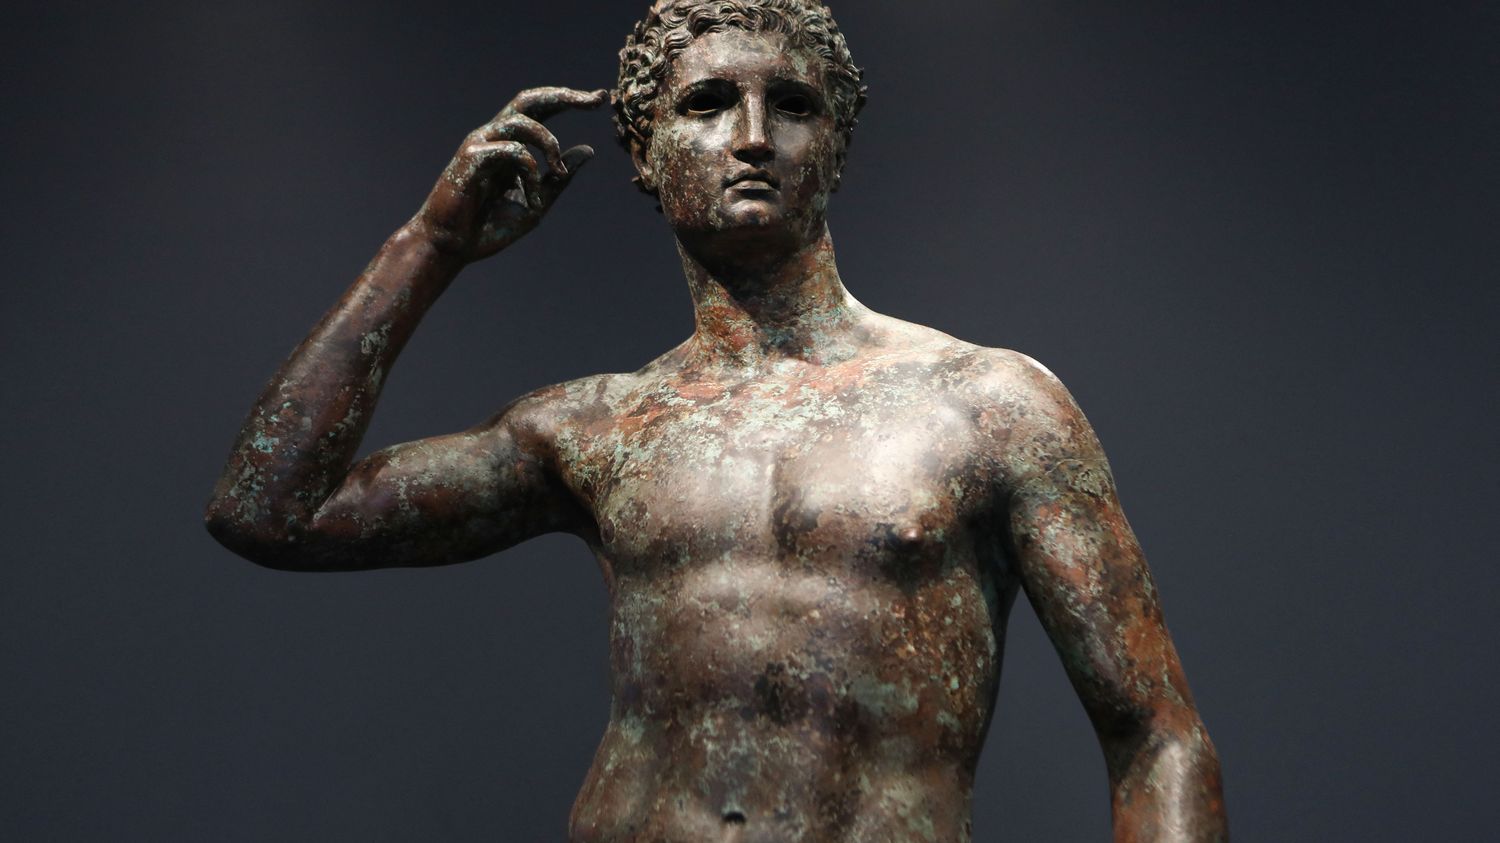 Italy wins decisive legal victory to return ancient bronze purchased by US museum